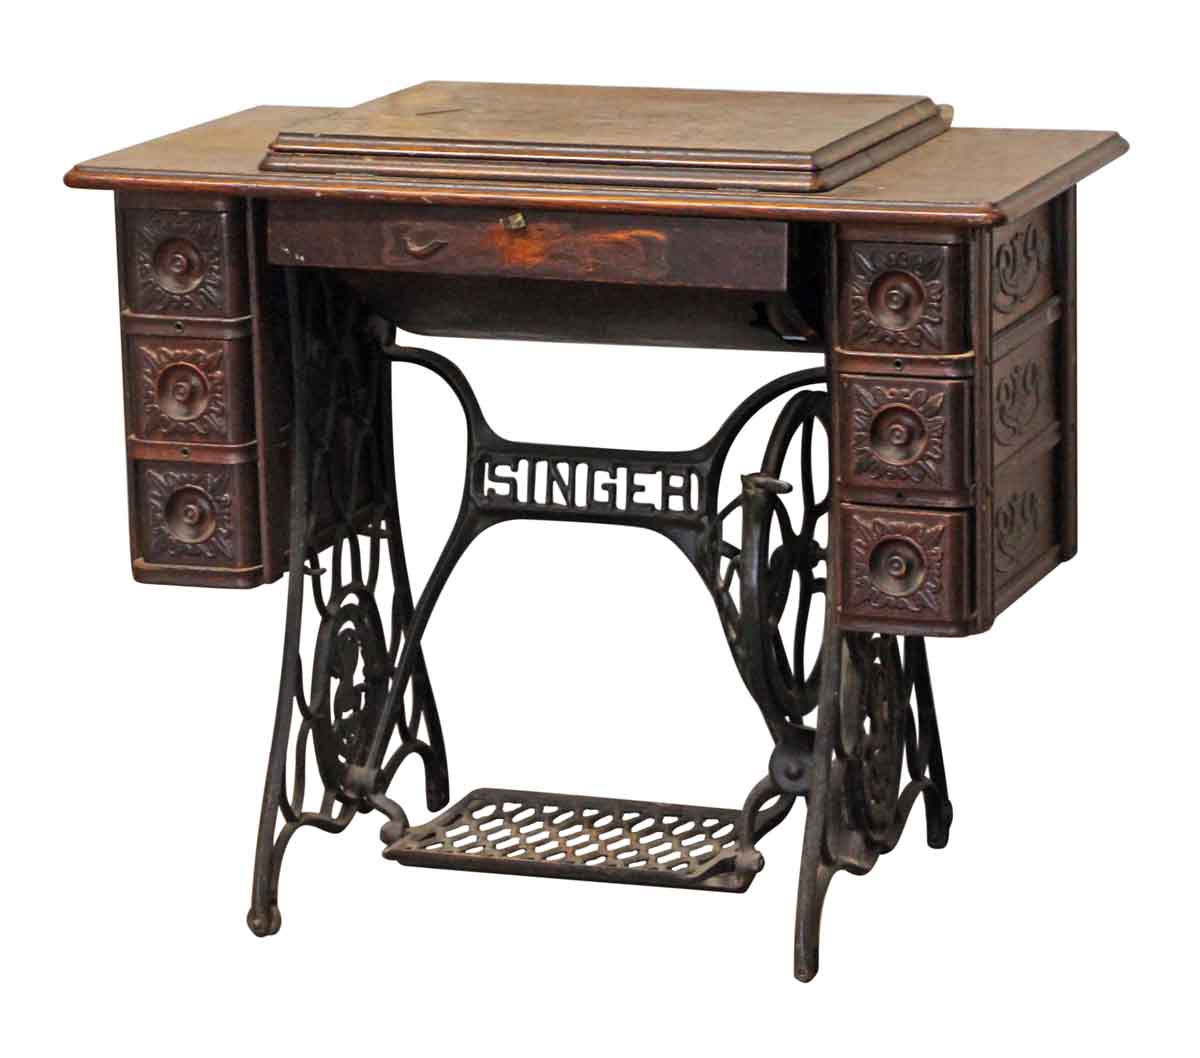 1908 Singer Treadle Sewing Machine With Carved Decorative Details